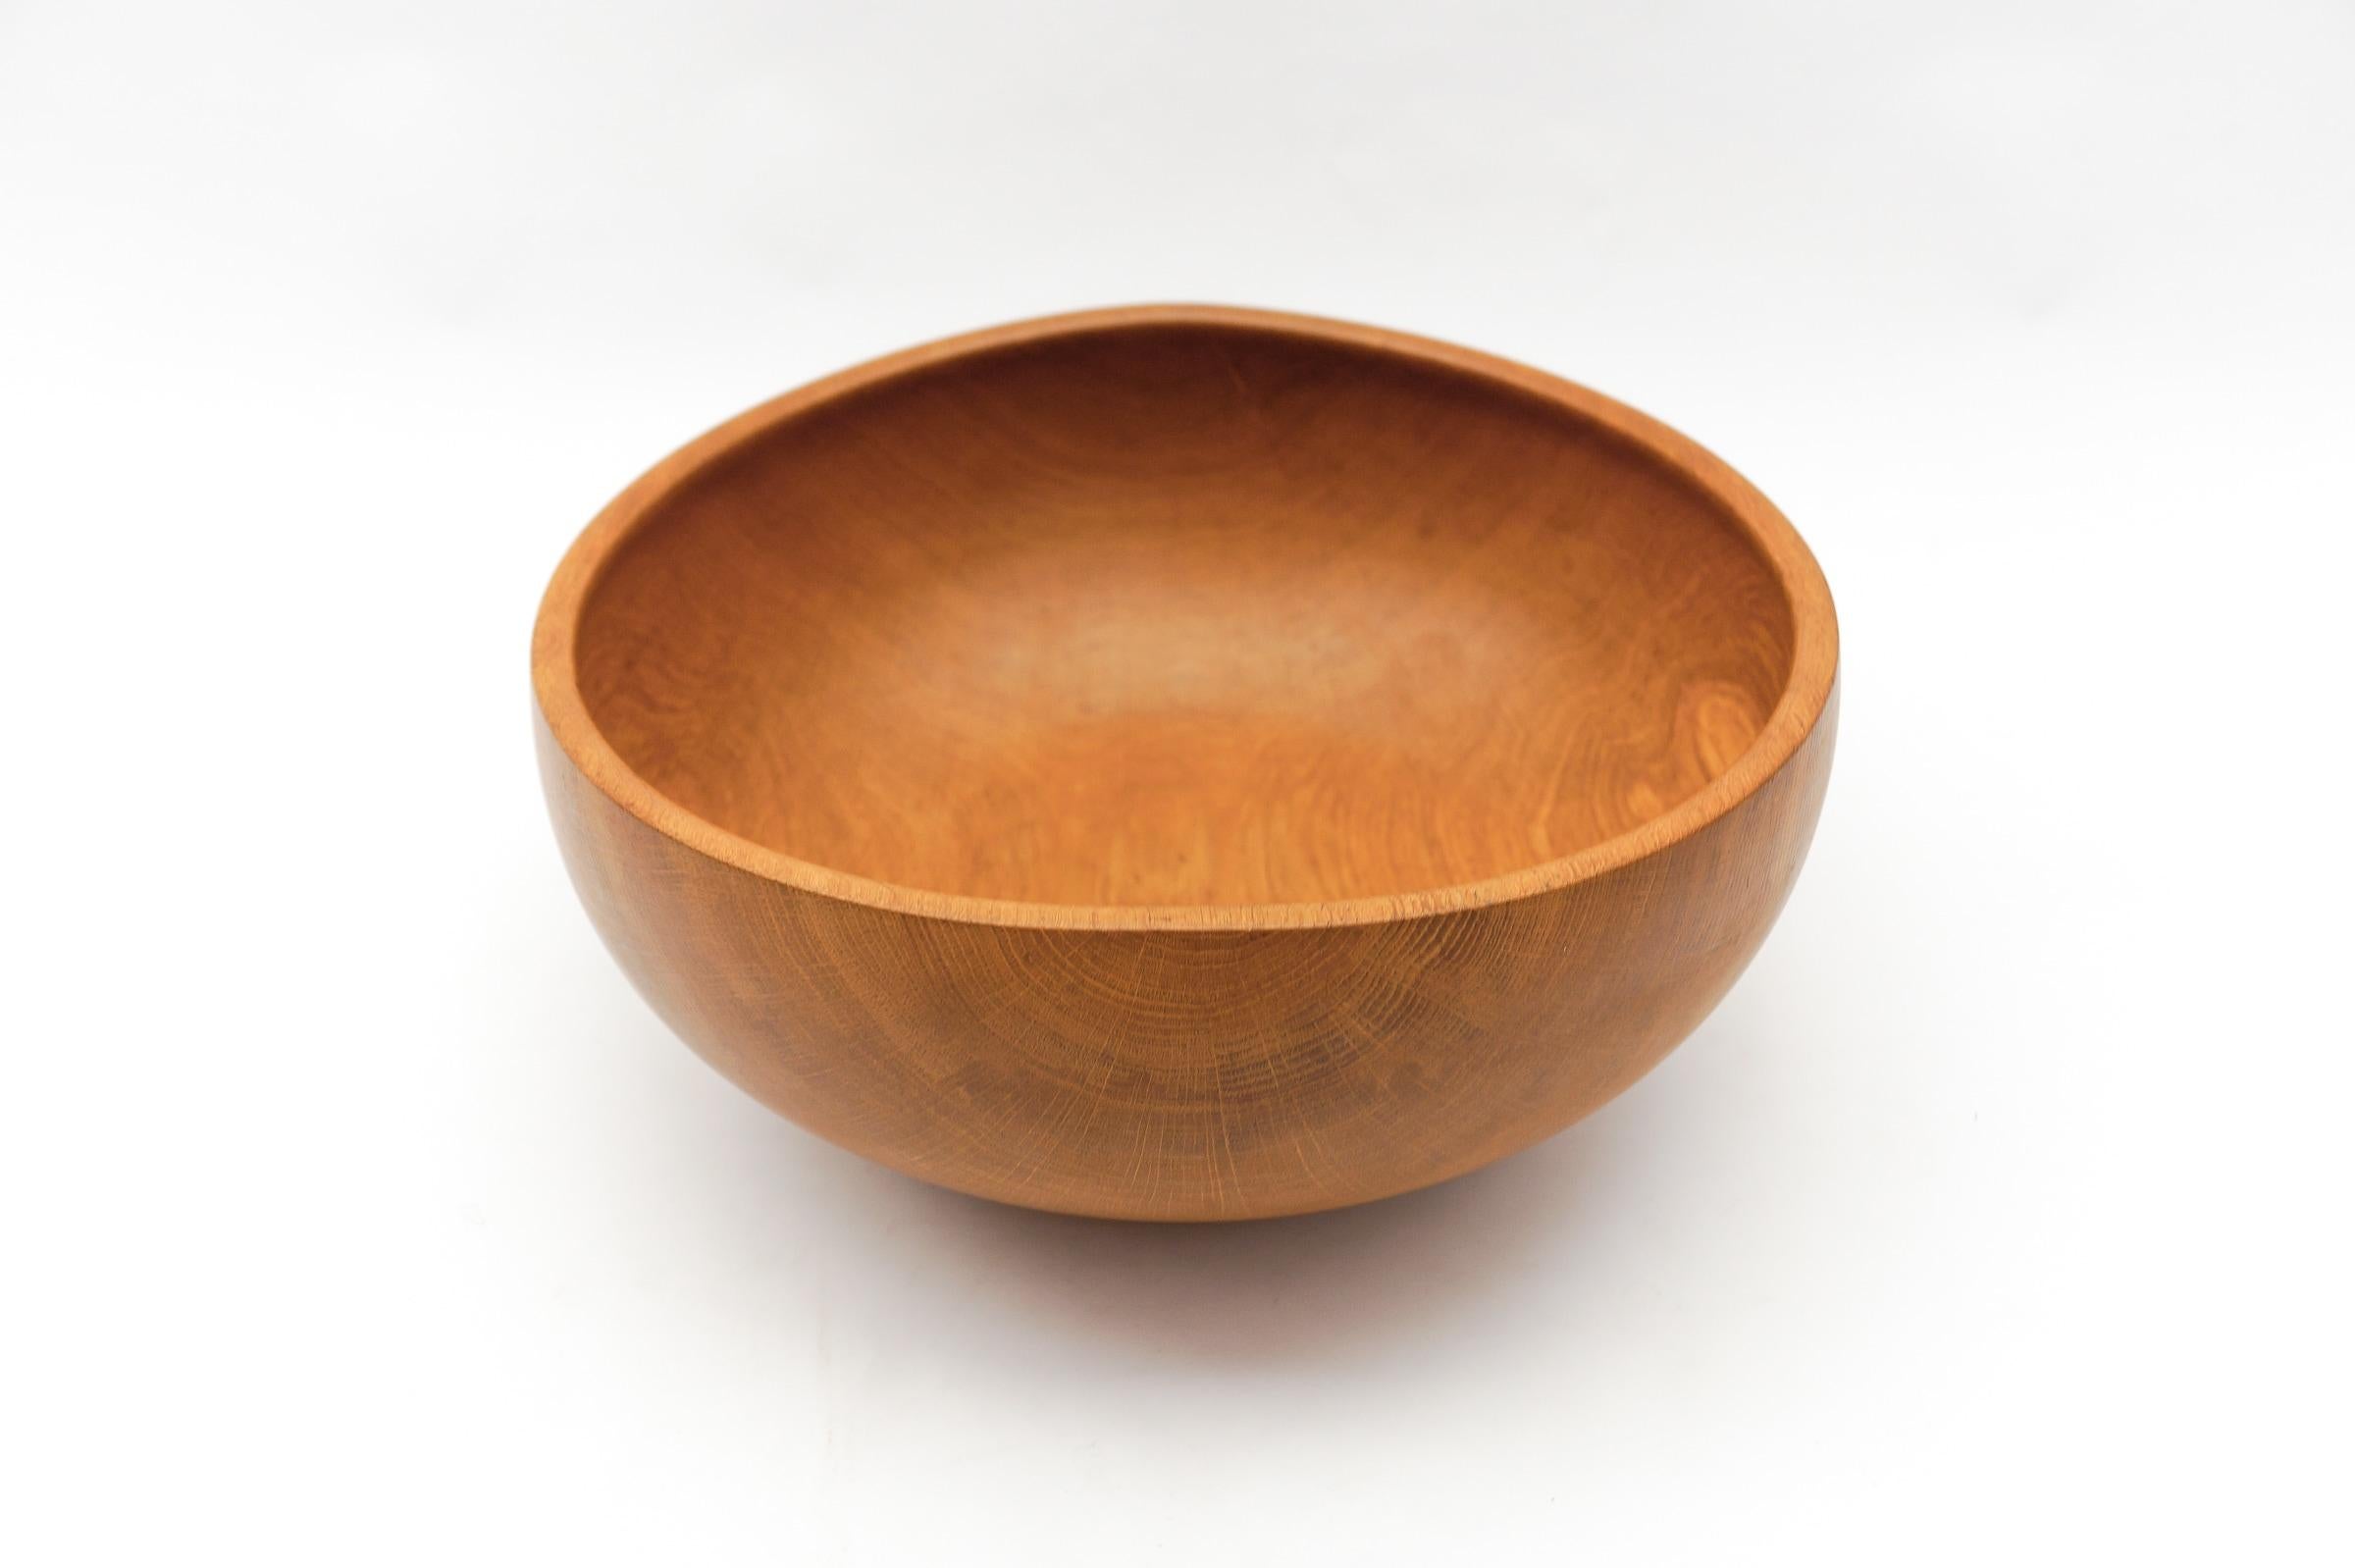 Awesome Huge Mid-Century Modern Oak Bowl by K. Weichselbaum, 1999 Germany For Sale 5